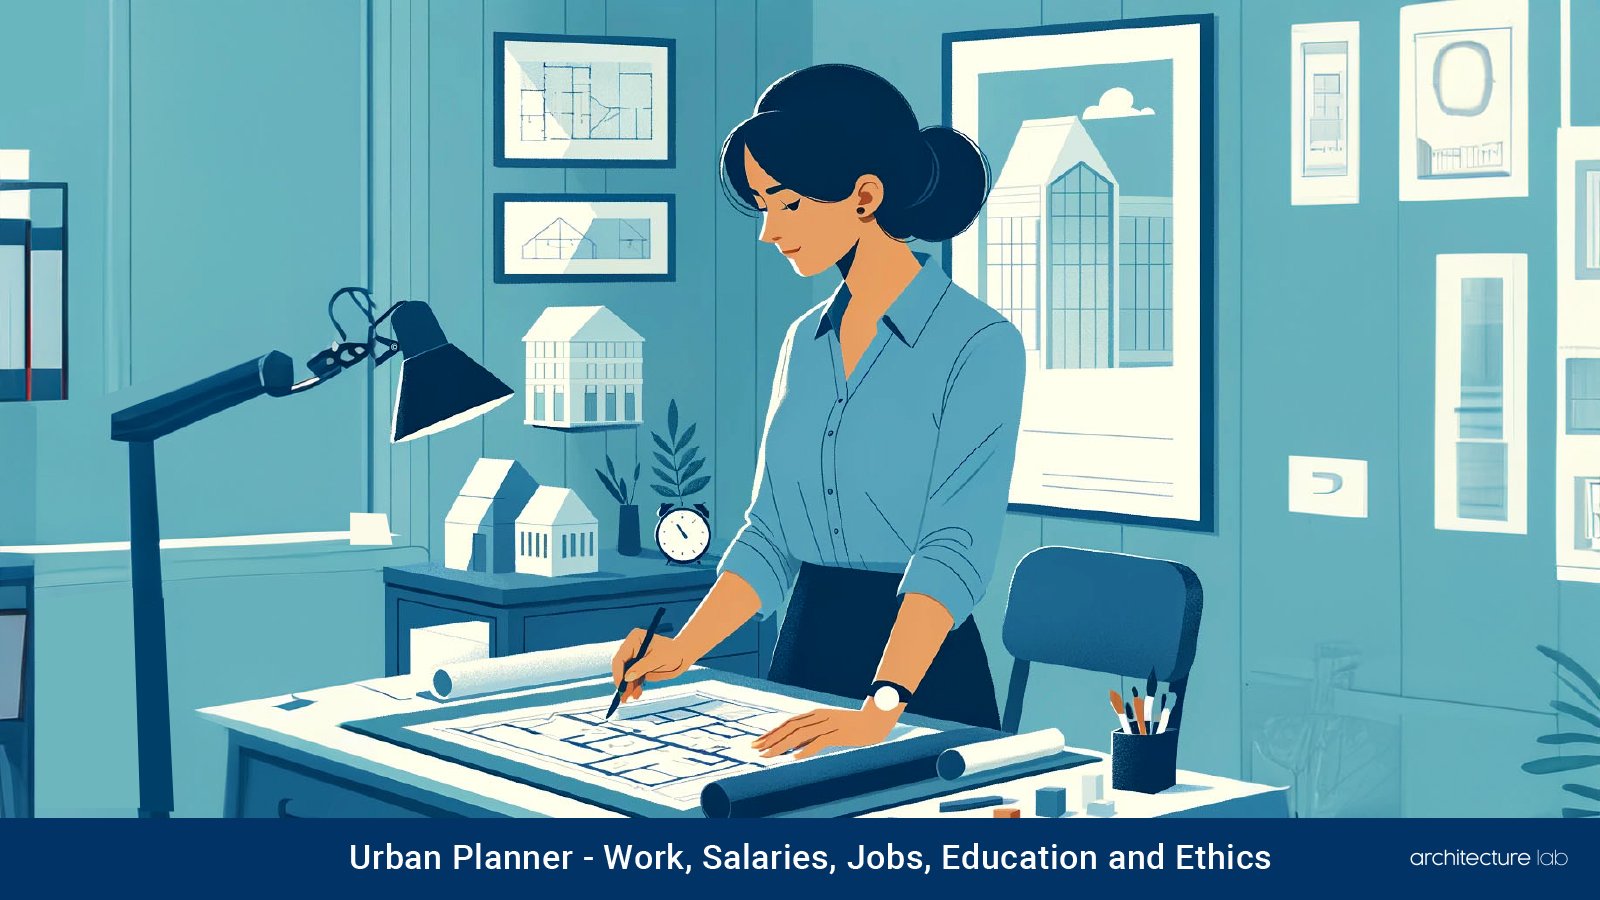 Urban planner: work, salaries, jobs, education and ethics